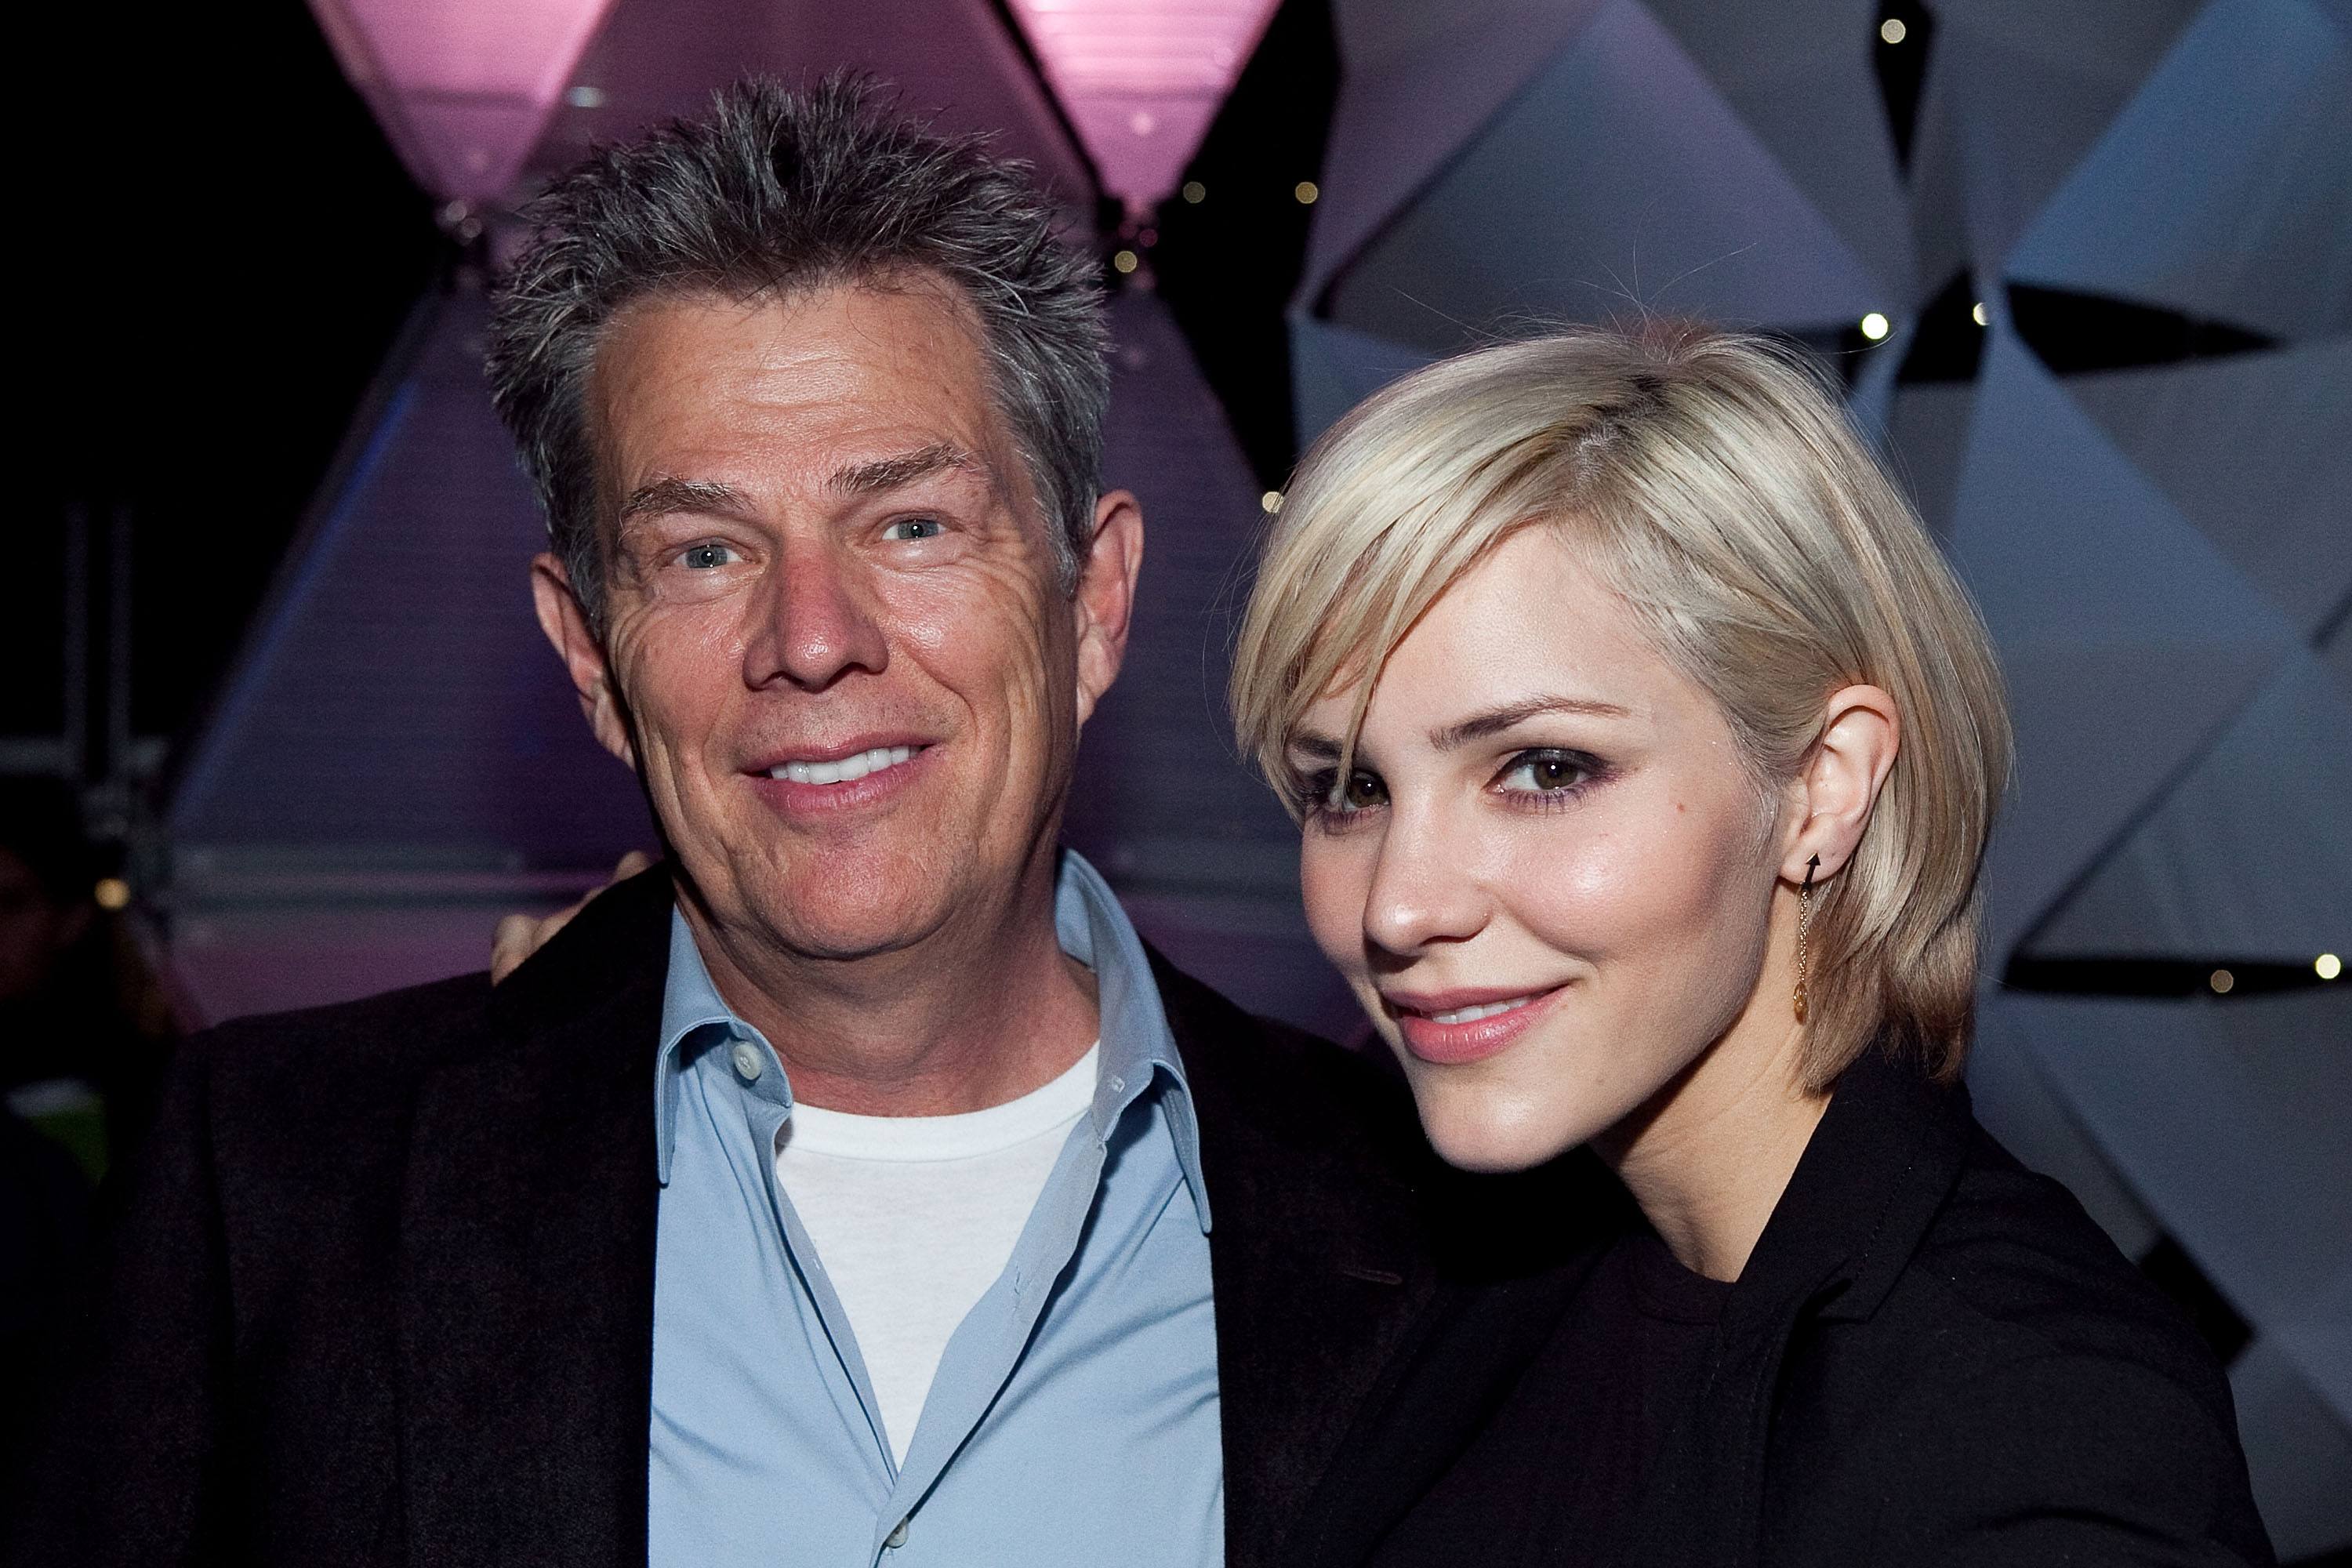 David Foster and Katharine McPhee in 2009